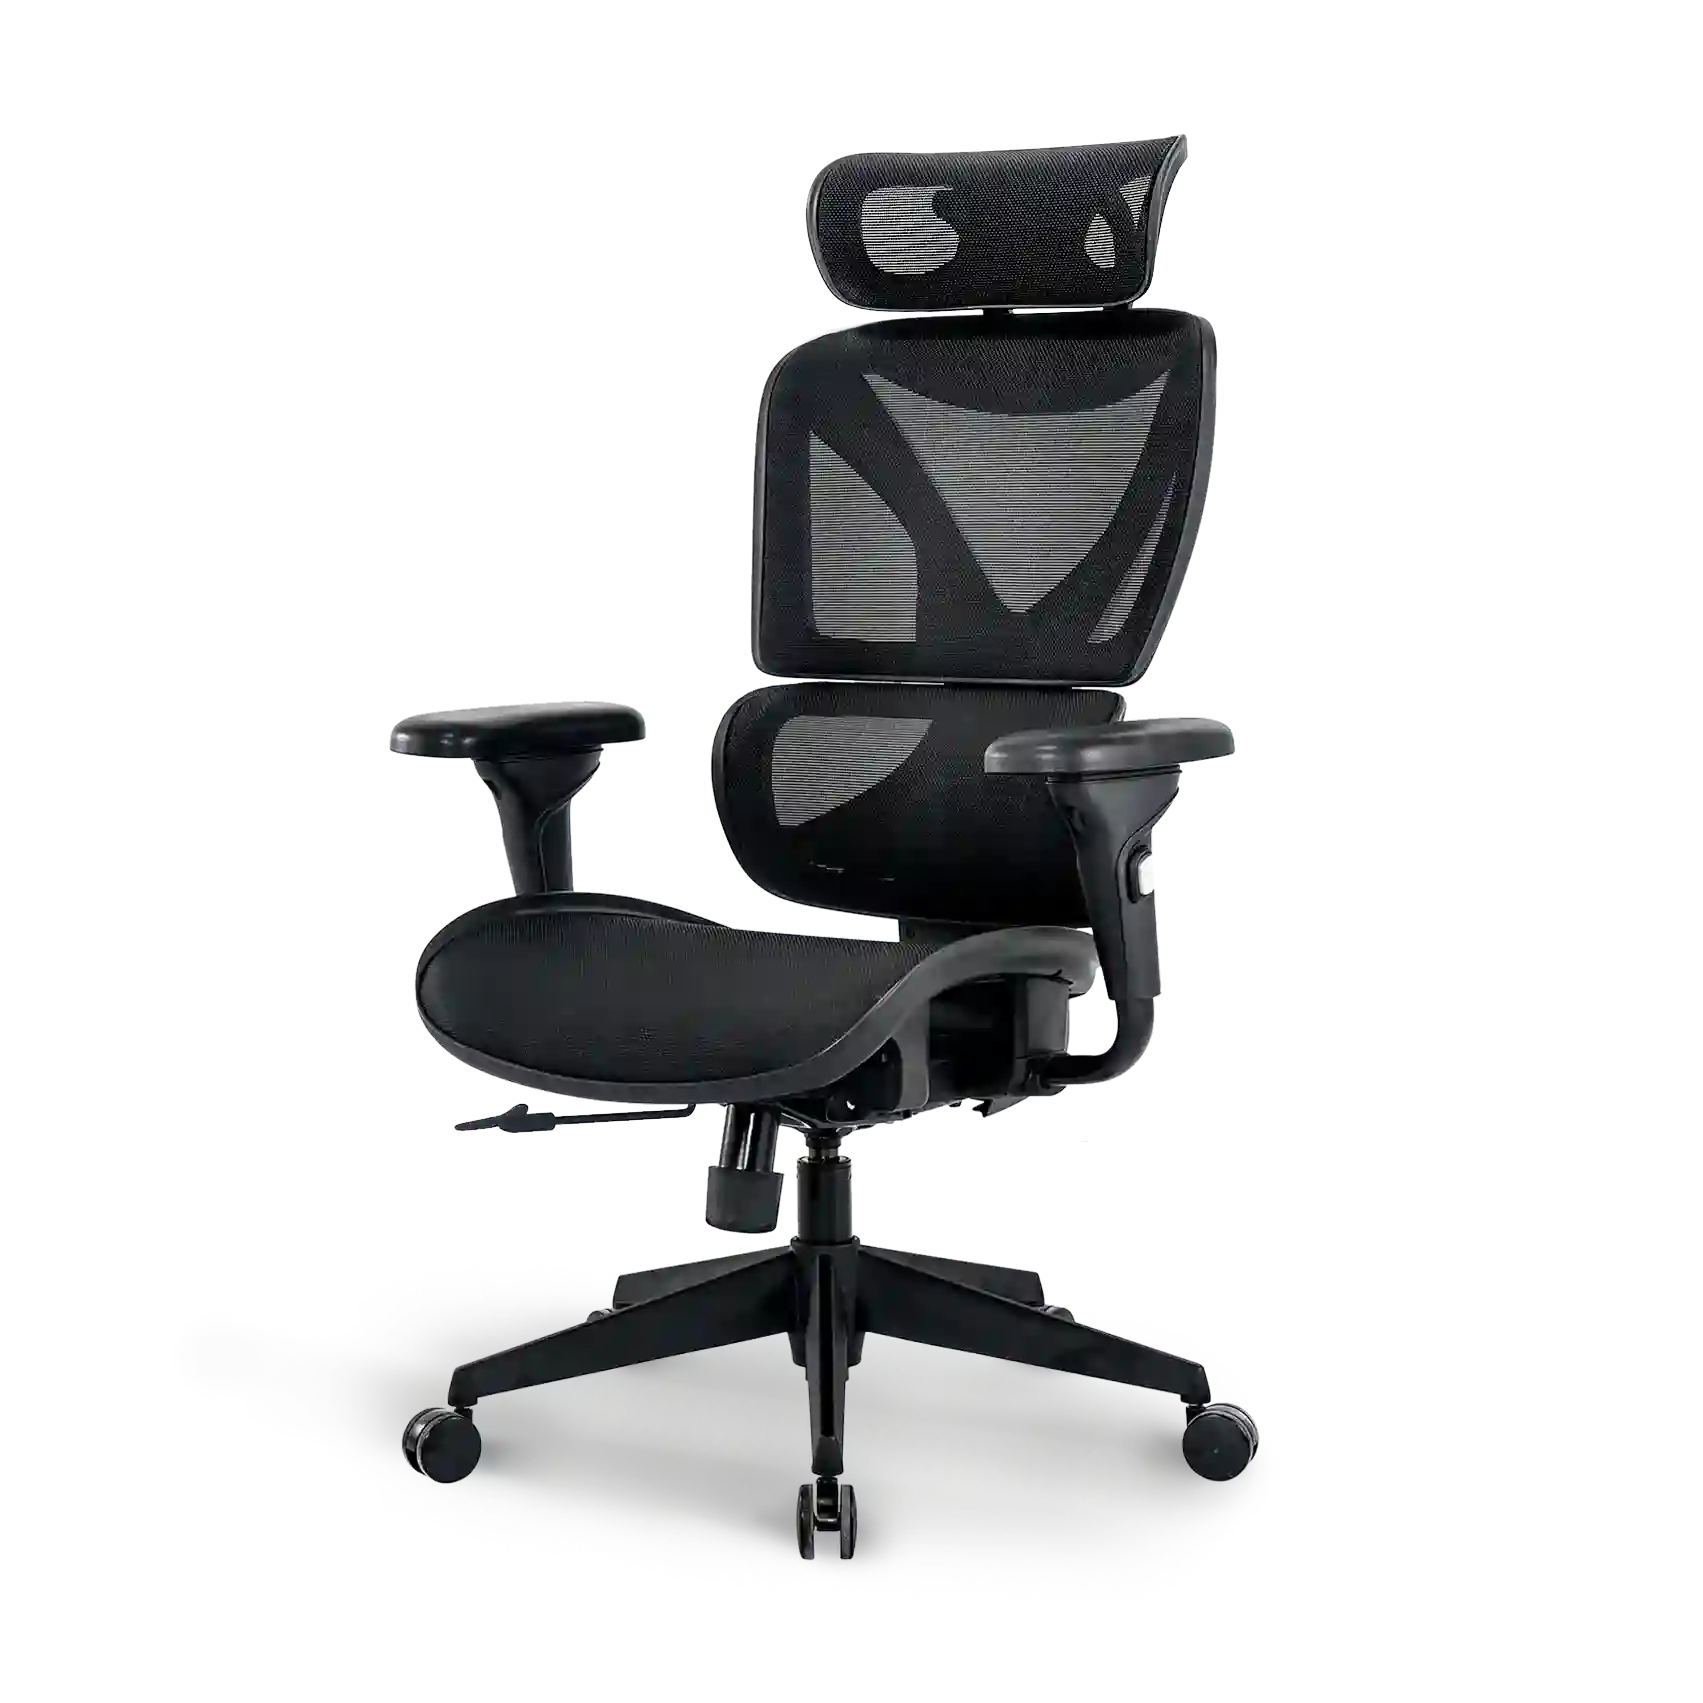 Front view of Bea with Headrest Ergonomic Chair in classic black, perfect for modern office environments.